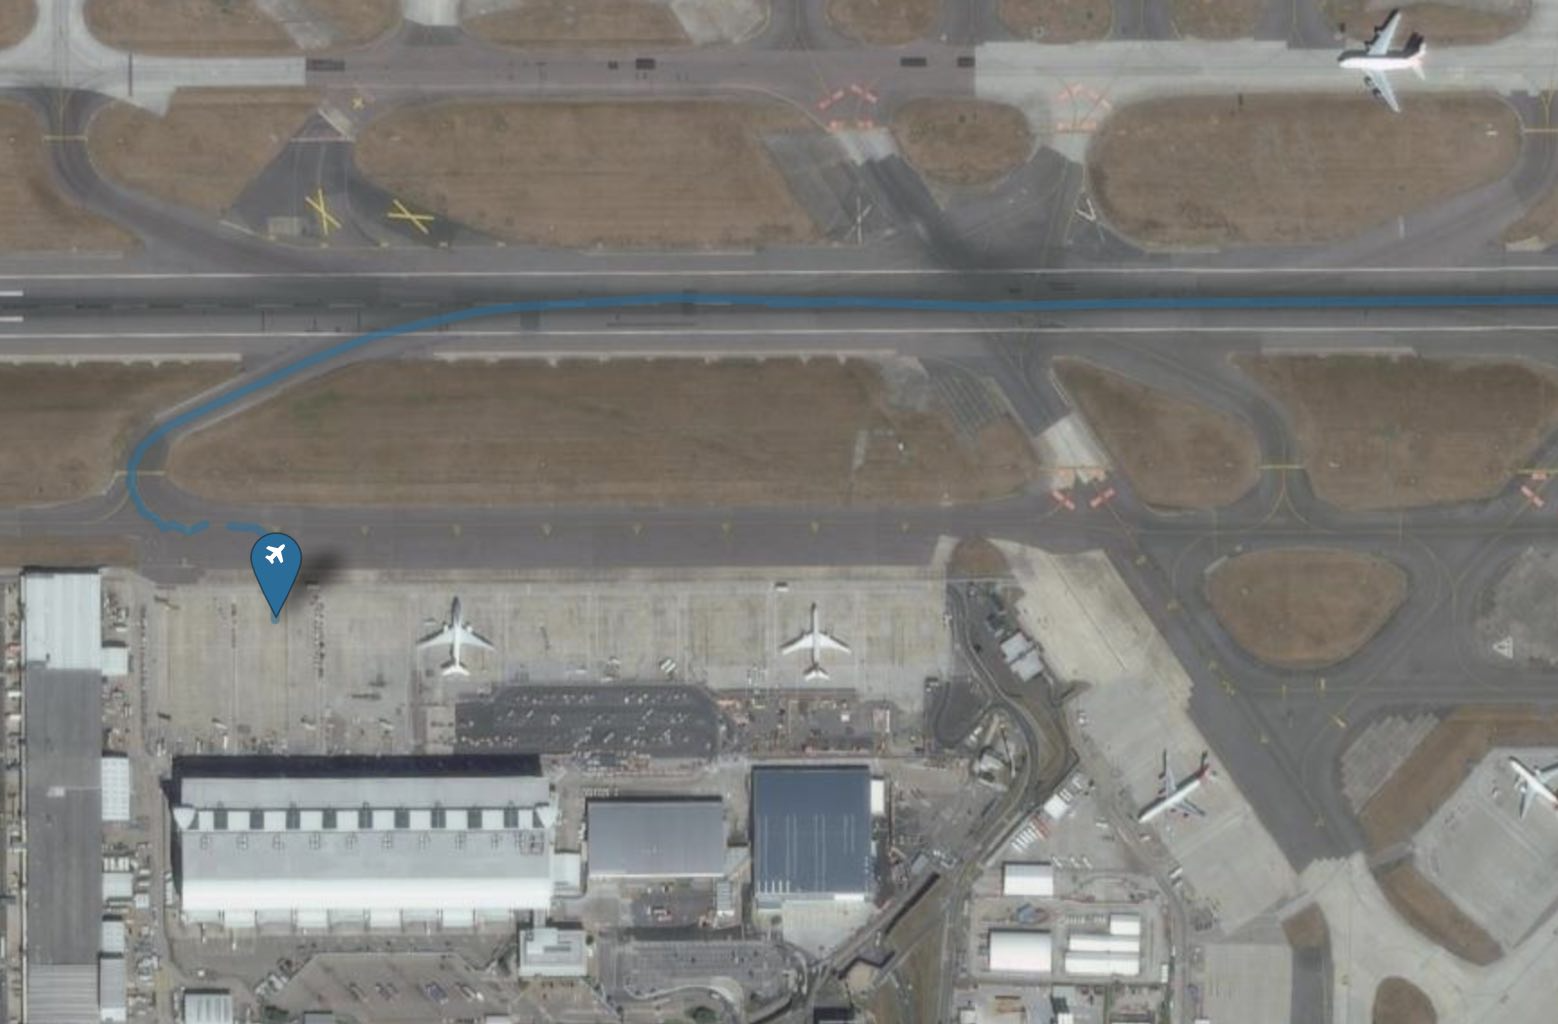 Airfield and plane at gate for geo-spatial analysis